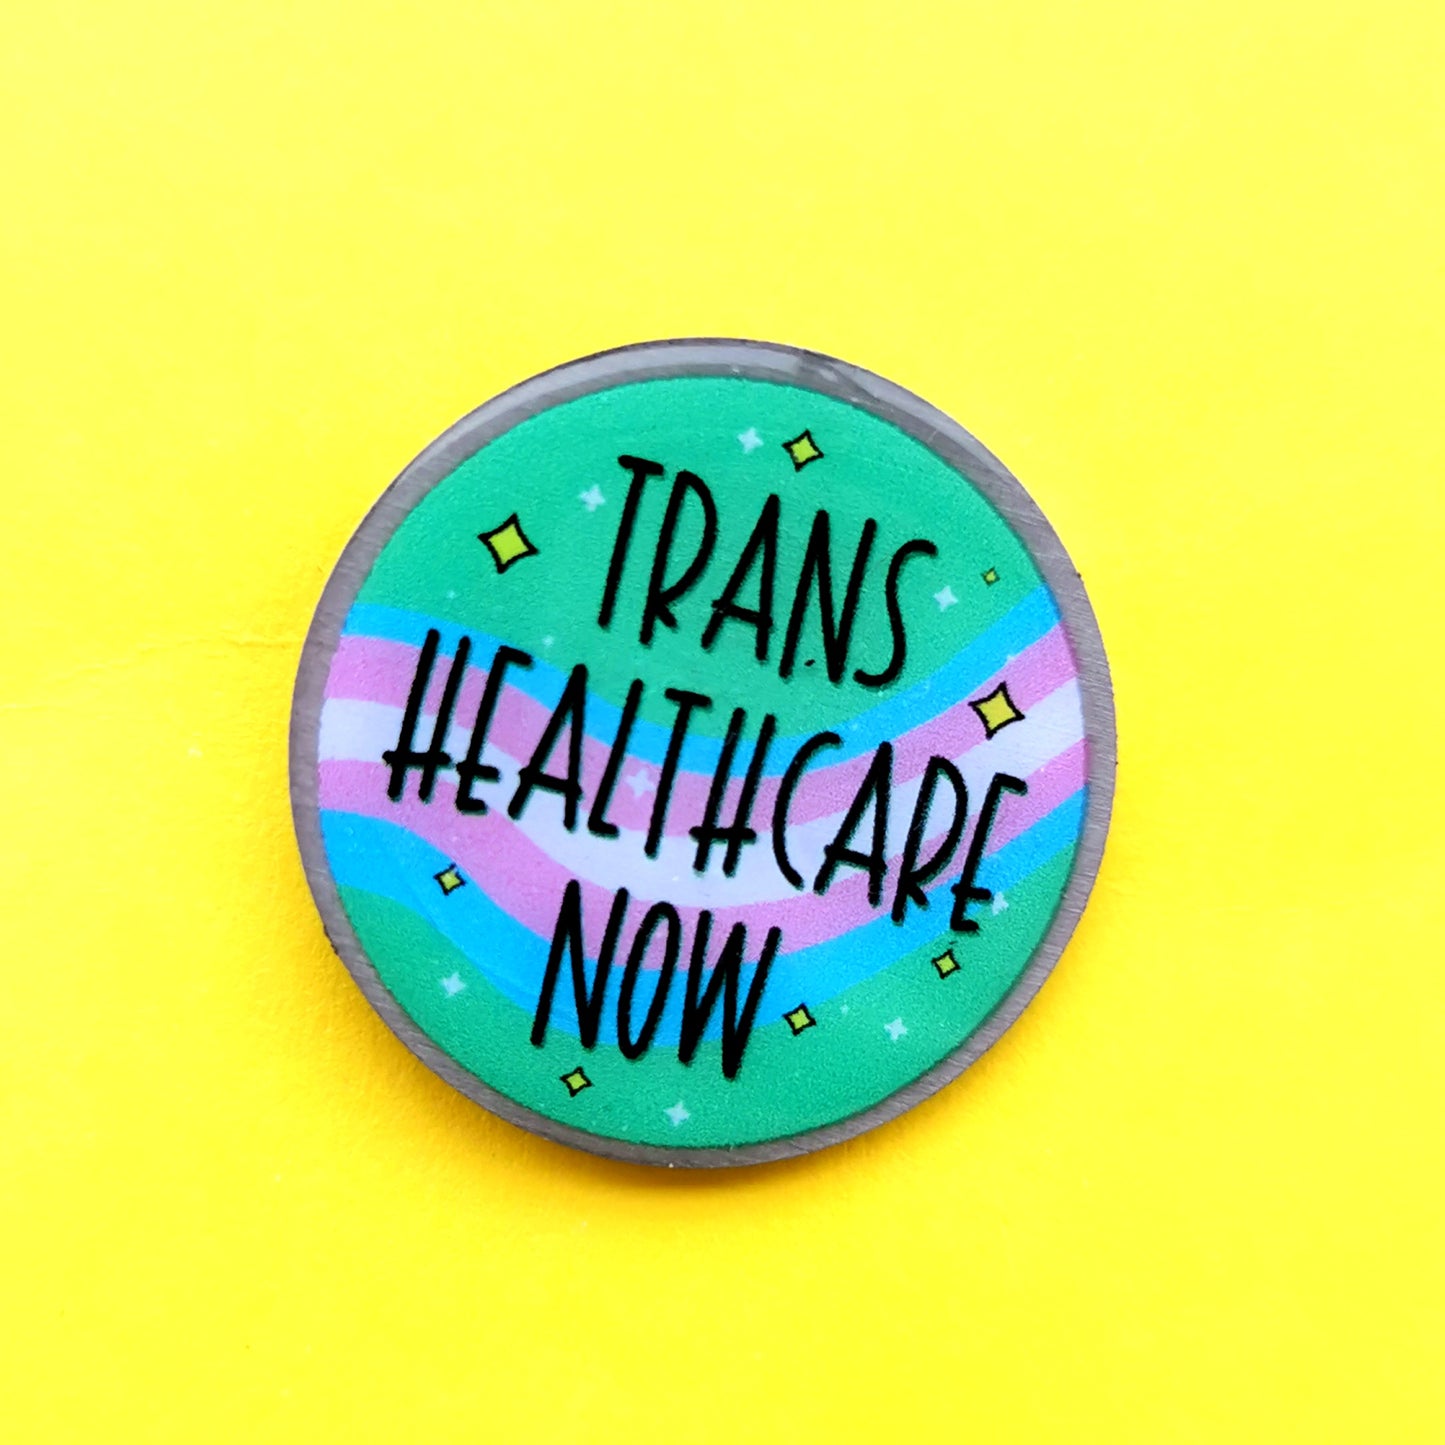 Trans Healthcare Now pin